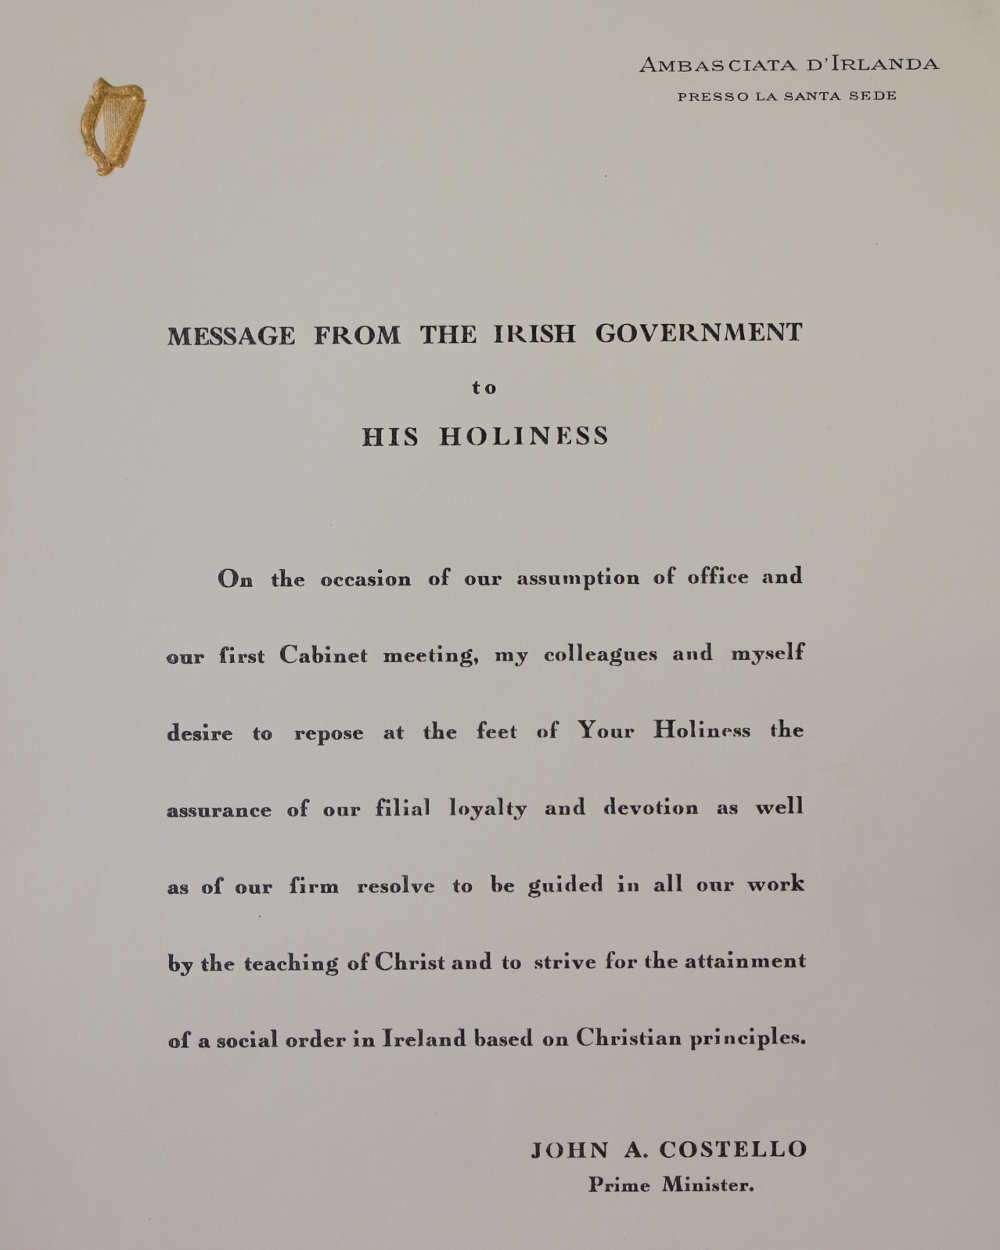 Facsimile reproduction of a message from John A. Costello to Pope Pius XII